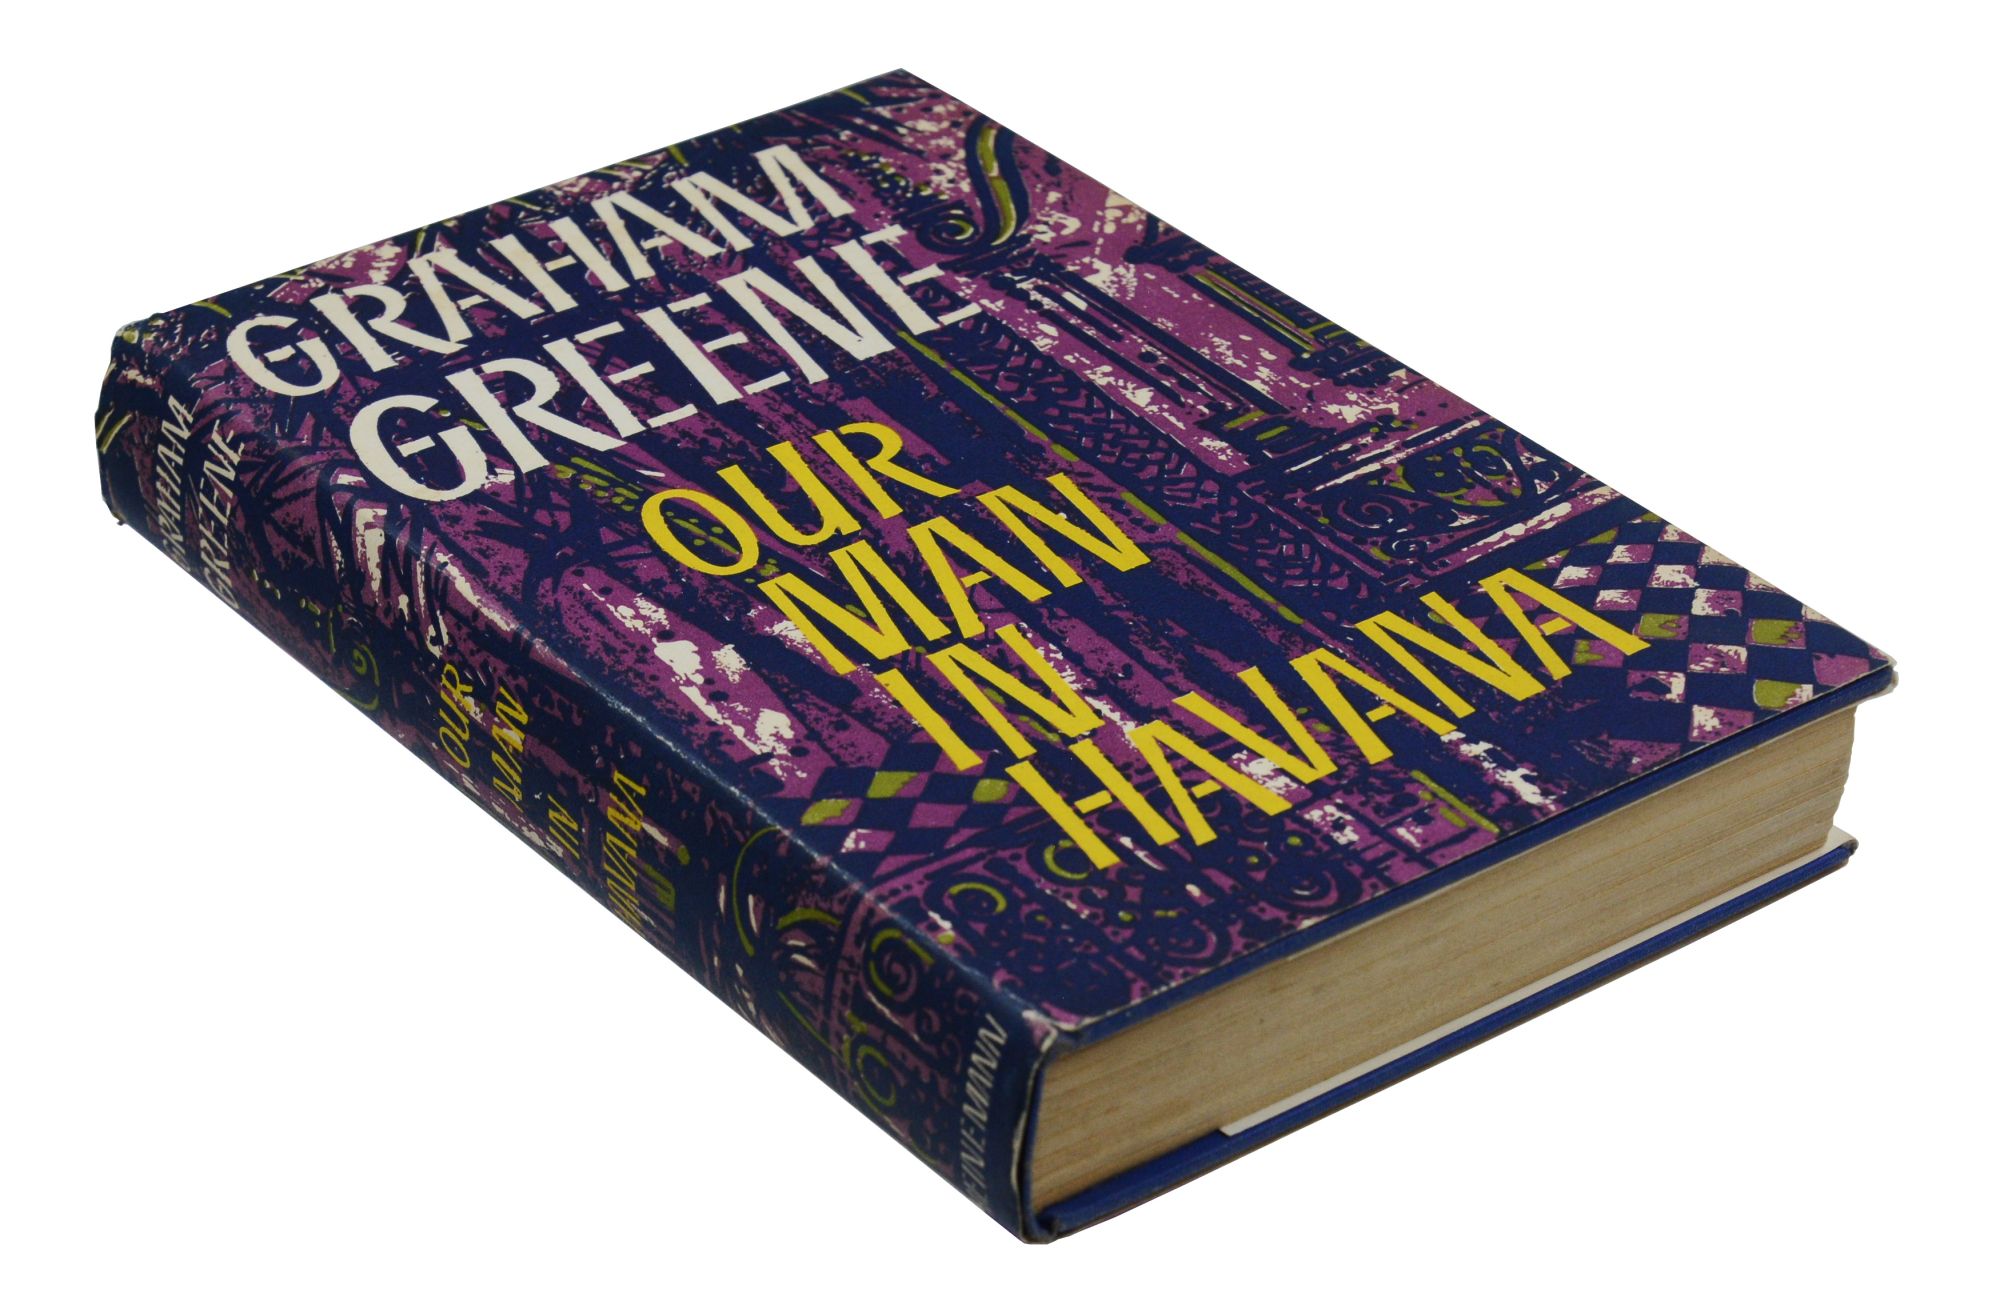 Sold at Auction: Graham Greene, Greene (Graham) Our Man in Havana, first  edition, signed by the author, 1958; and 10 others by Greene (11)